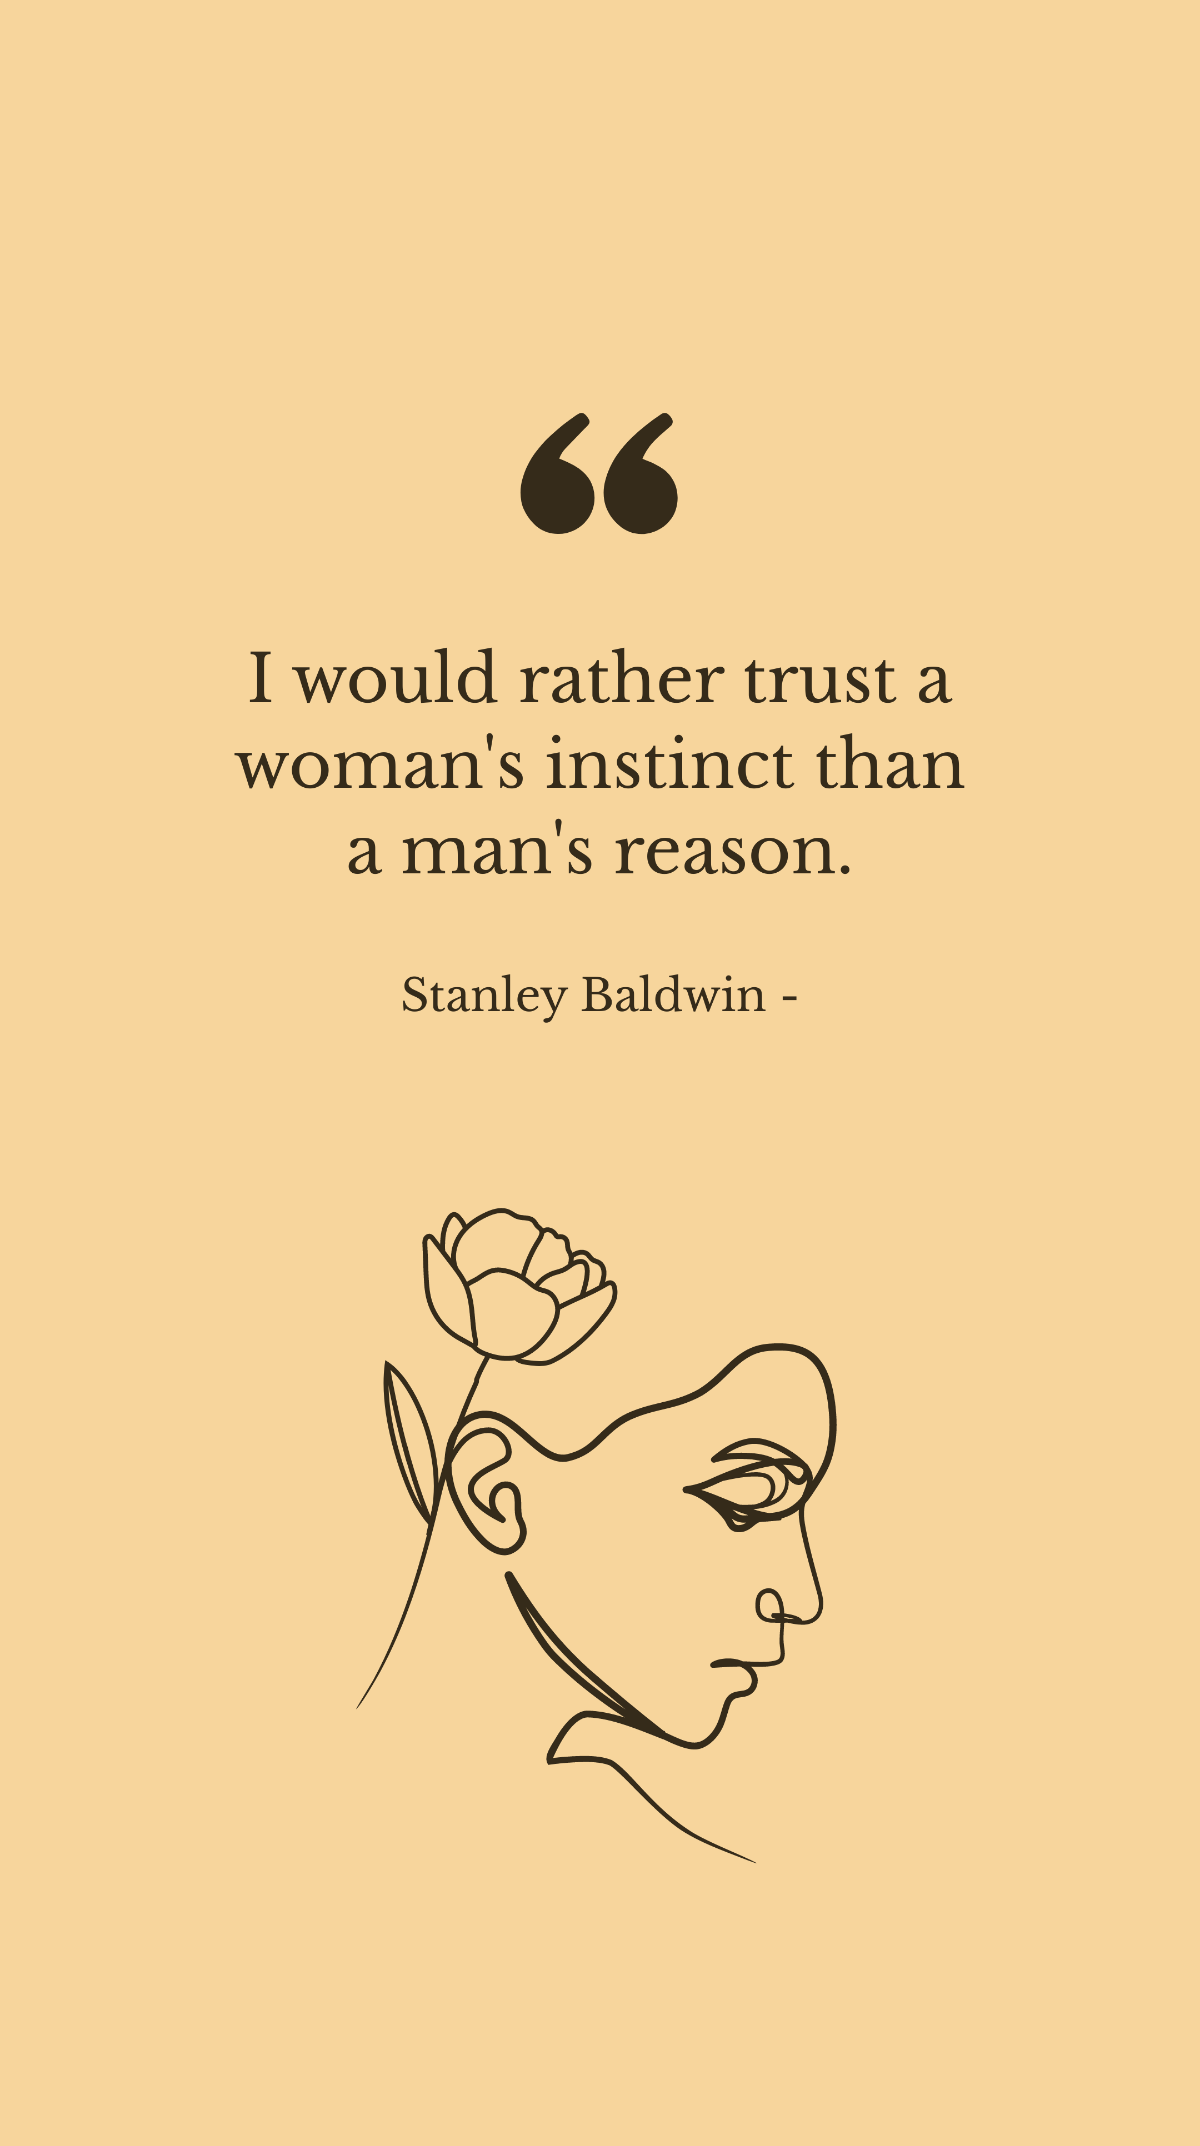 Stanley Baldwin - I would rather trust a woman's instinct than a man's reason. Template